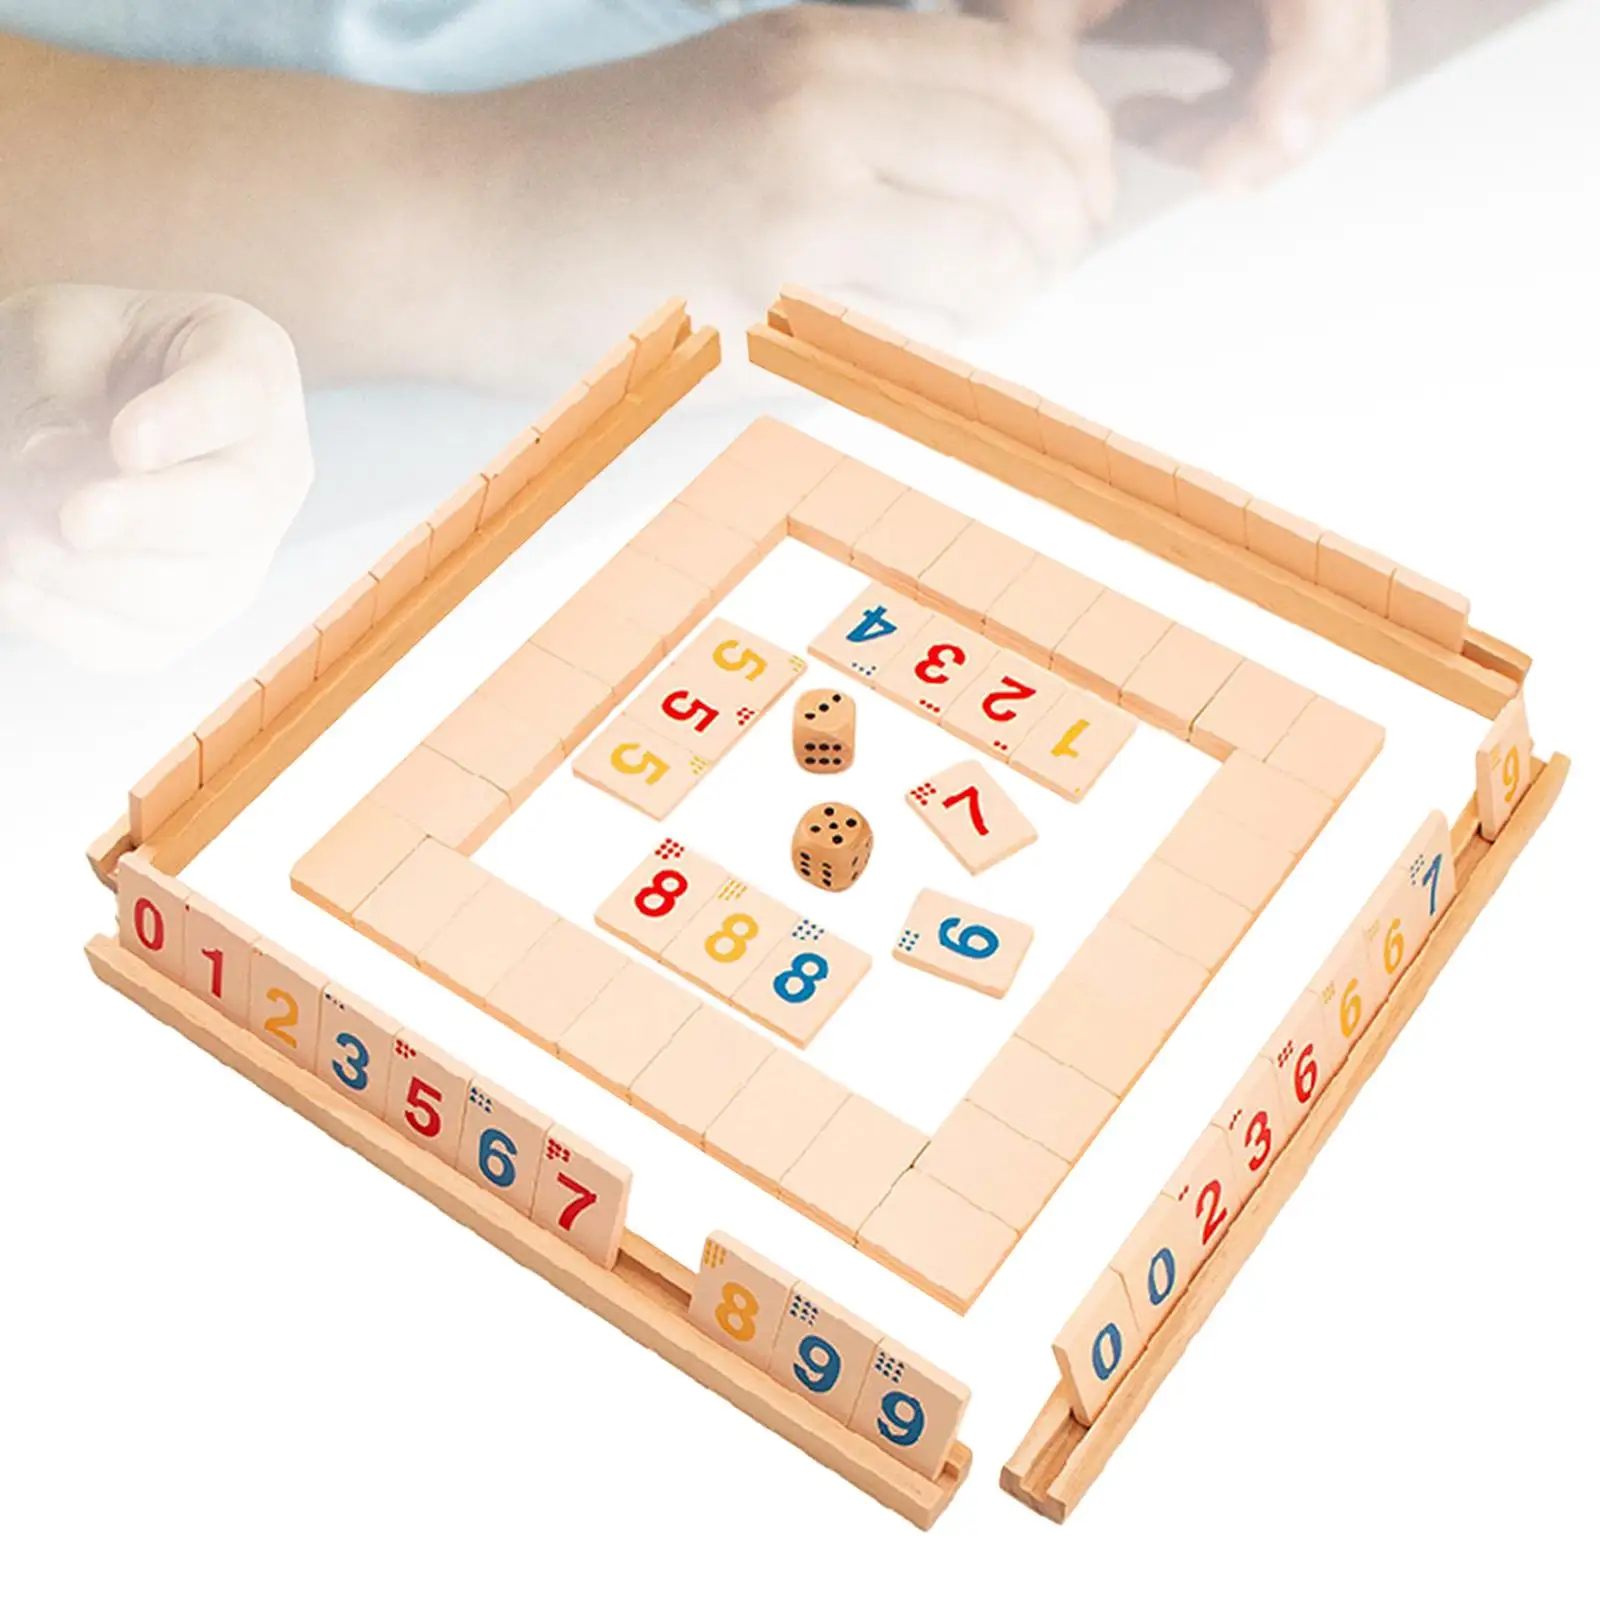 Portable Fast Moving Tile Party Game 2-4 People Mahjong Digital Game for Kids Teens Adults